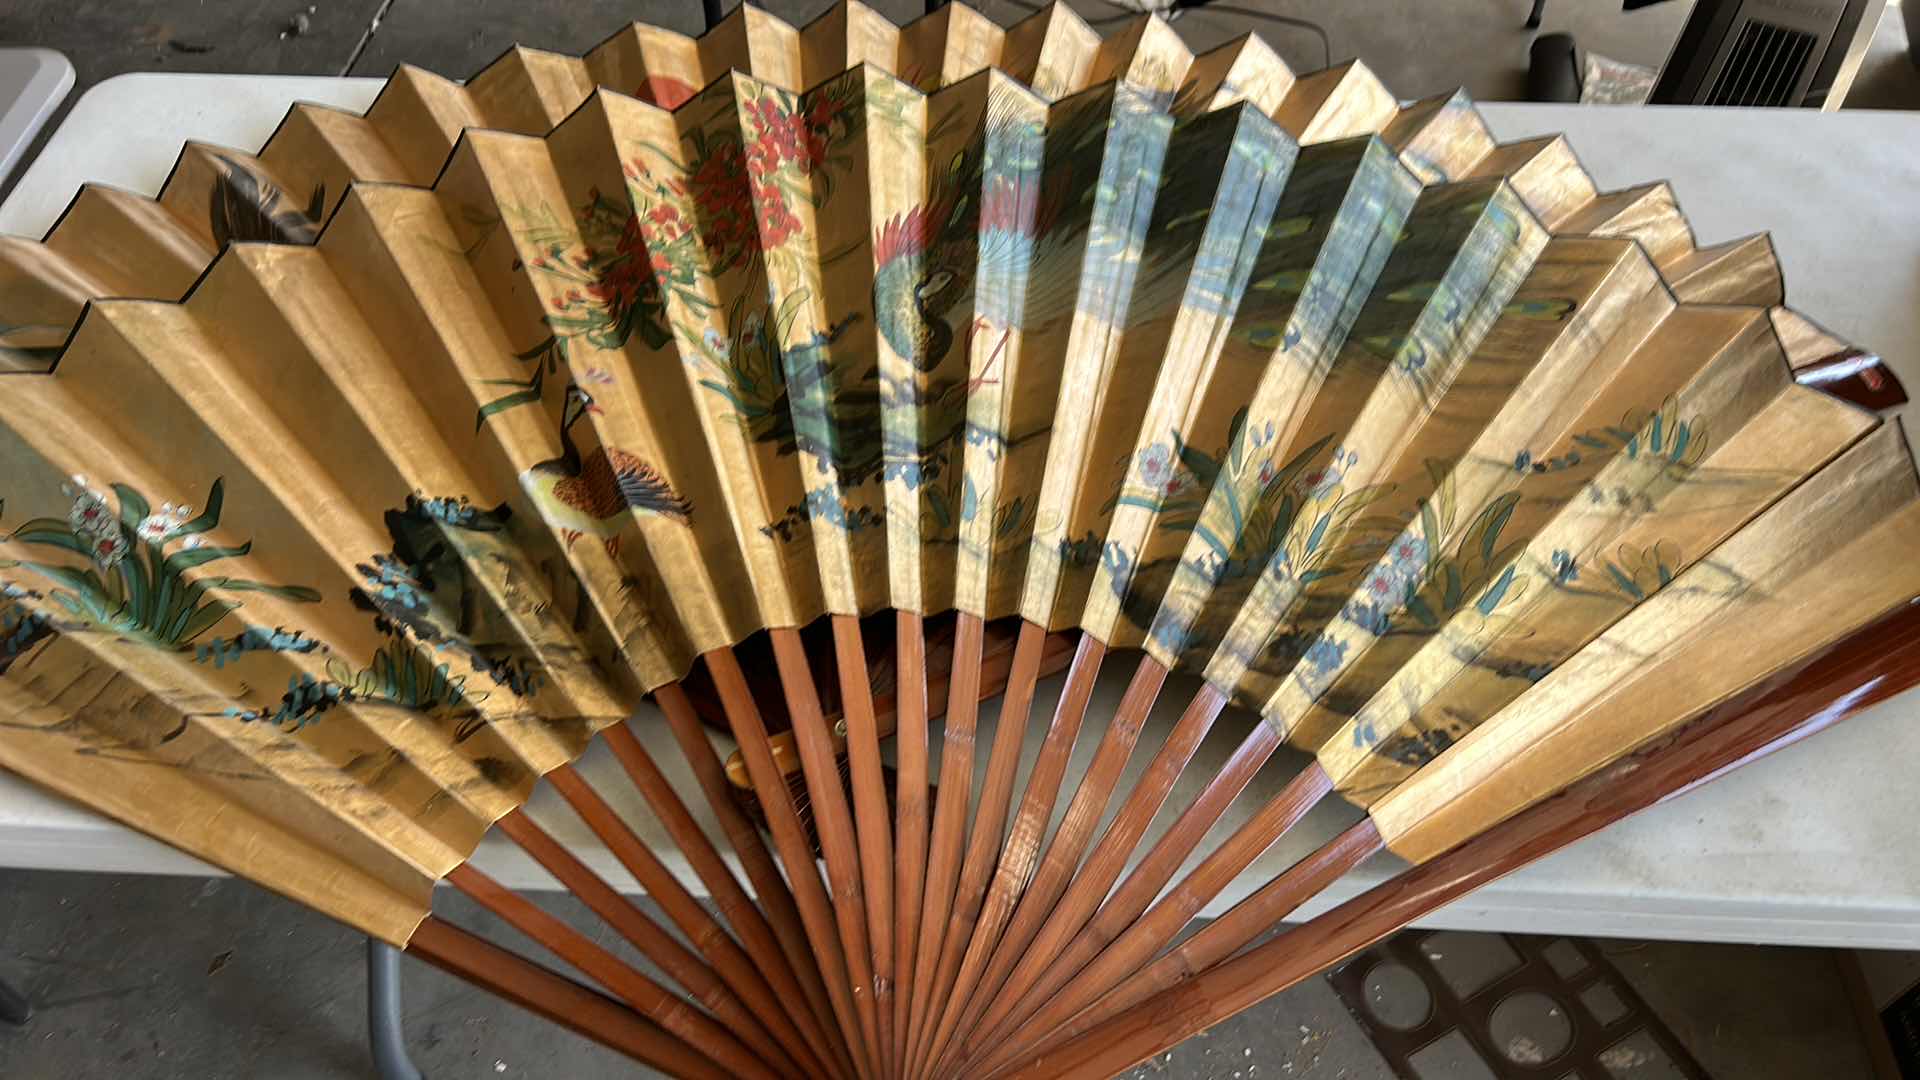 Photo 1 of 2 LARGE HAND-PAINTED FANS 5’ x 3’